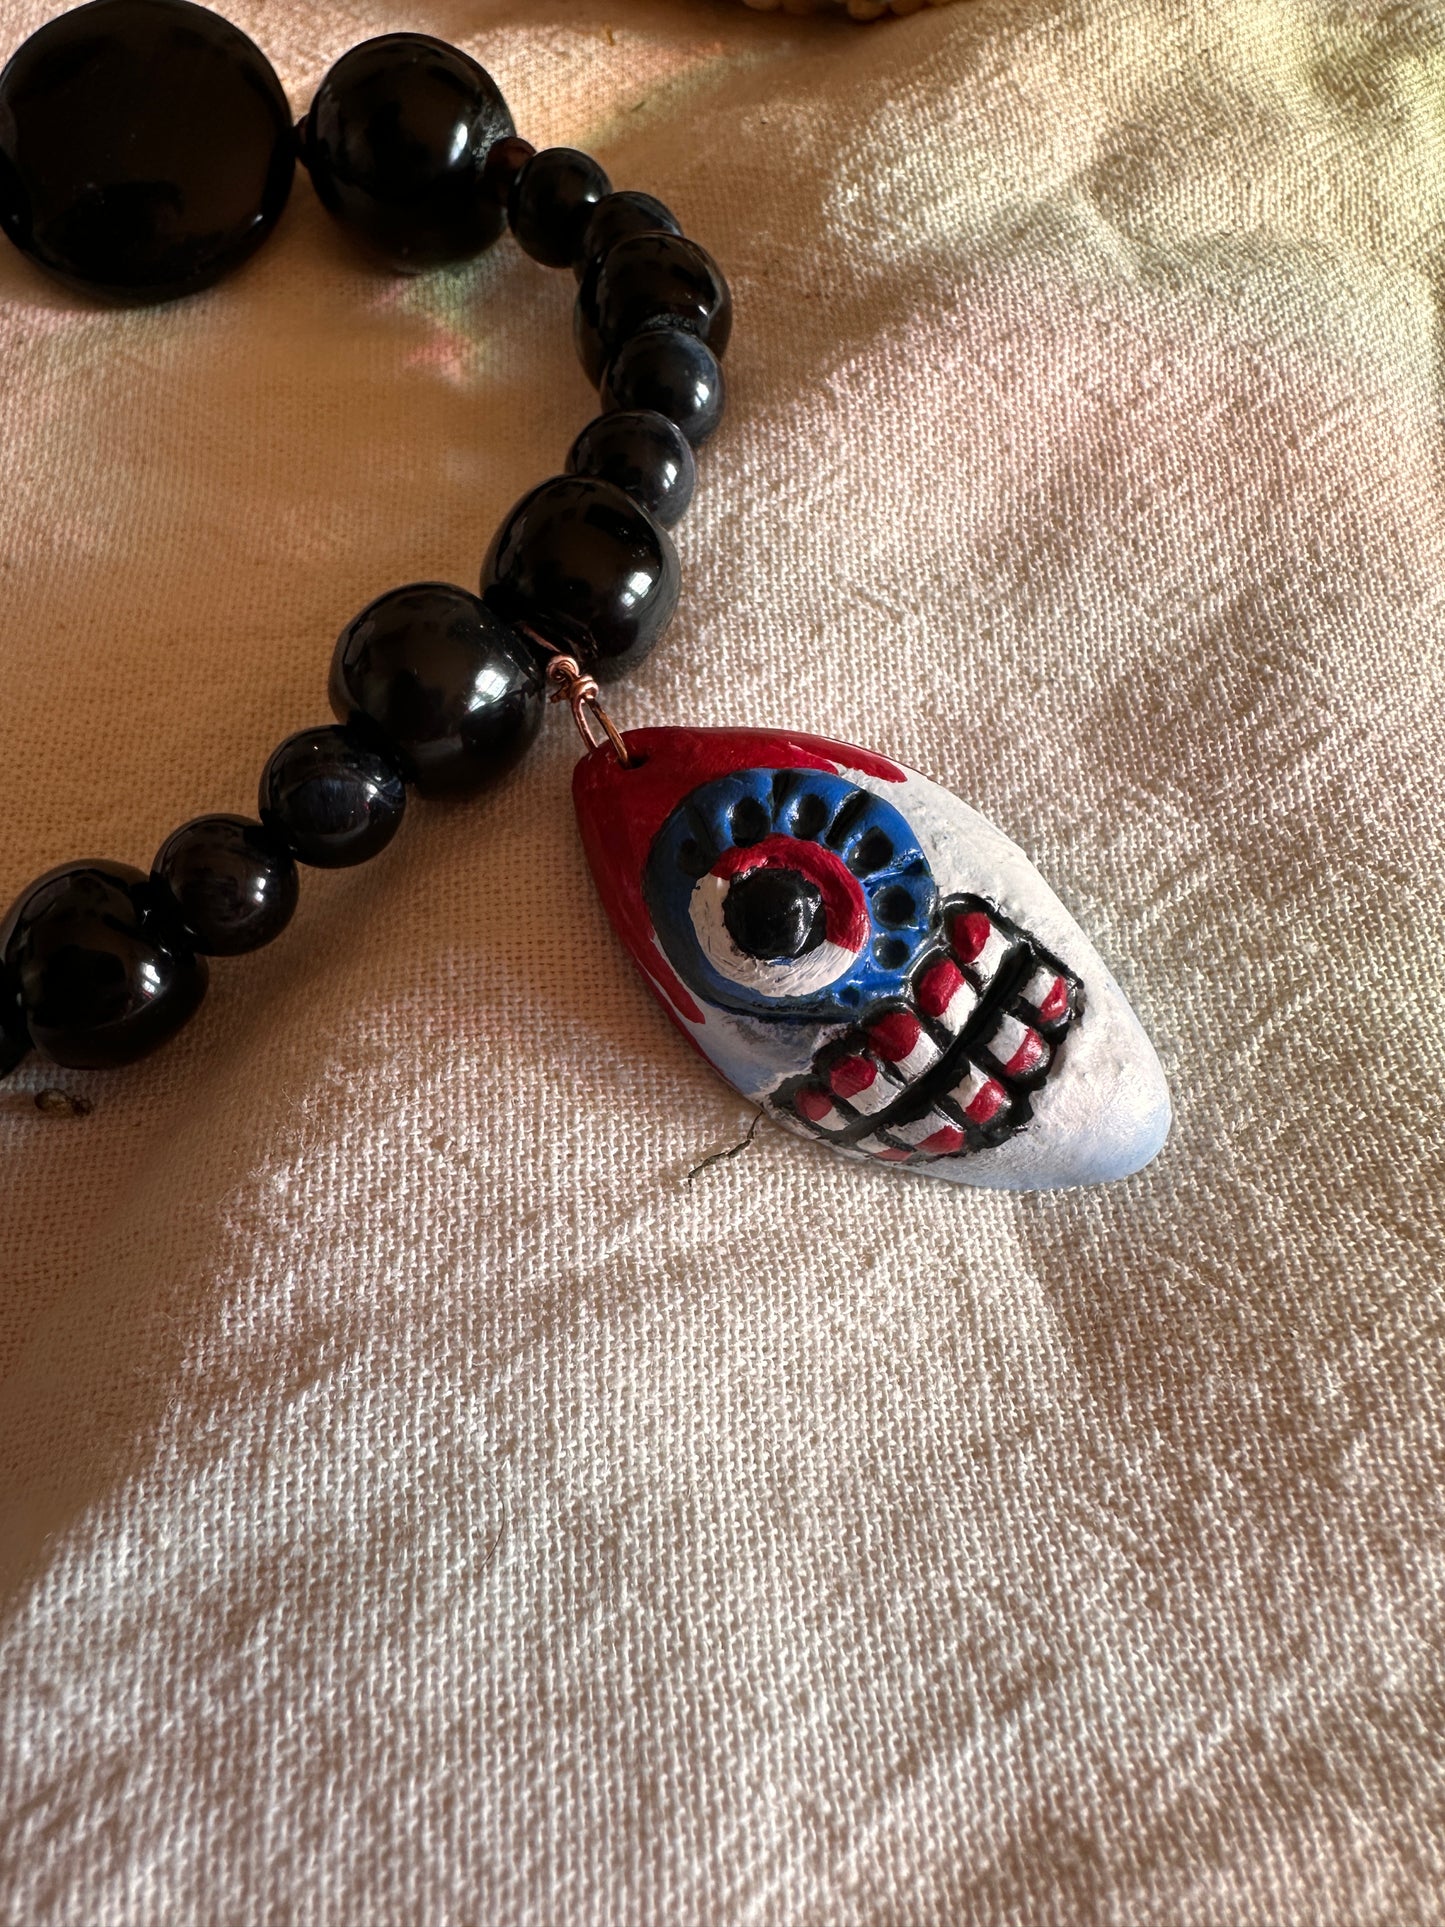 Handpainted Tecpatl and precious beads necklace